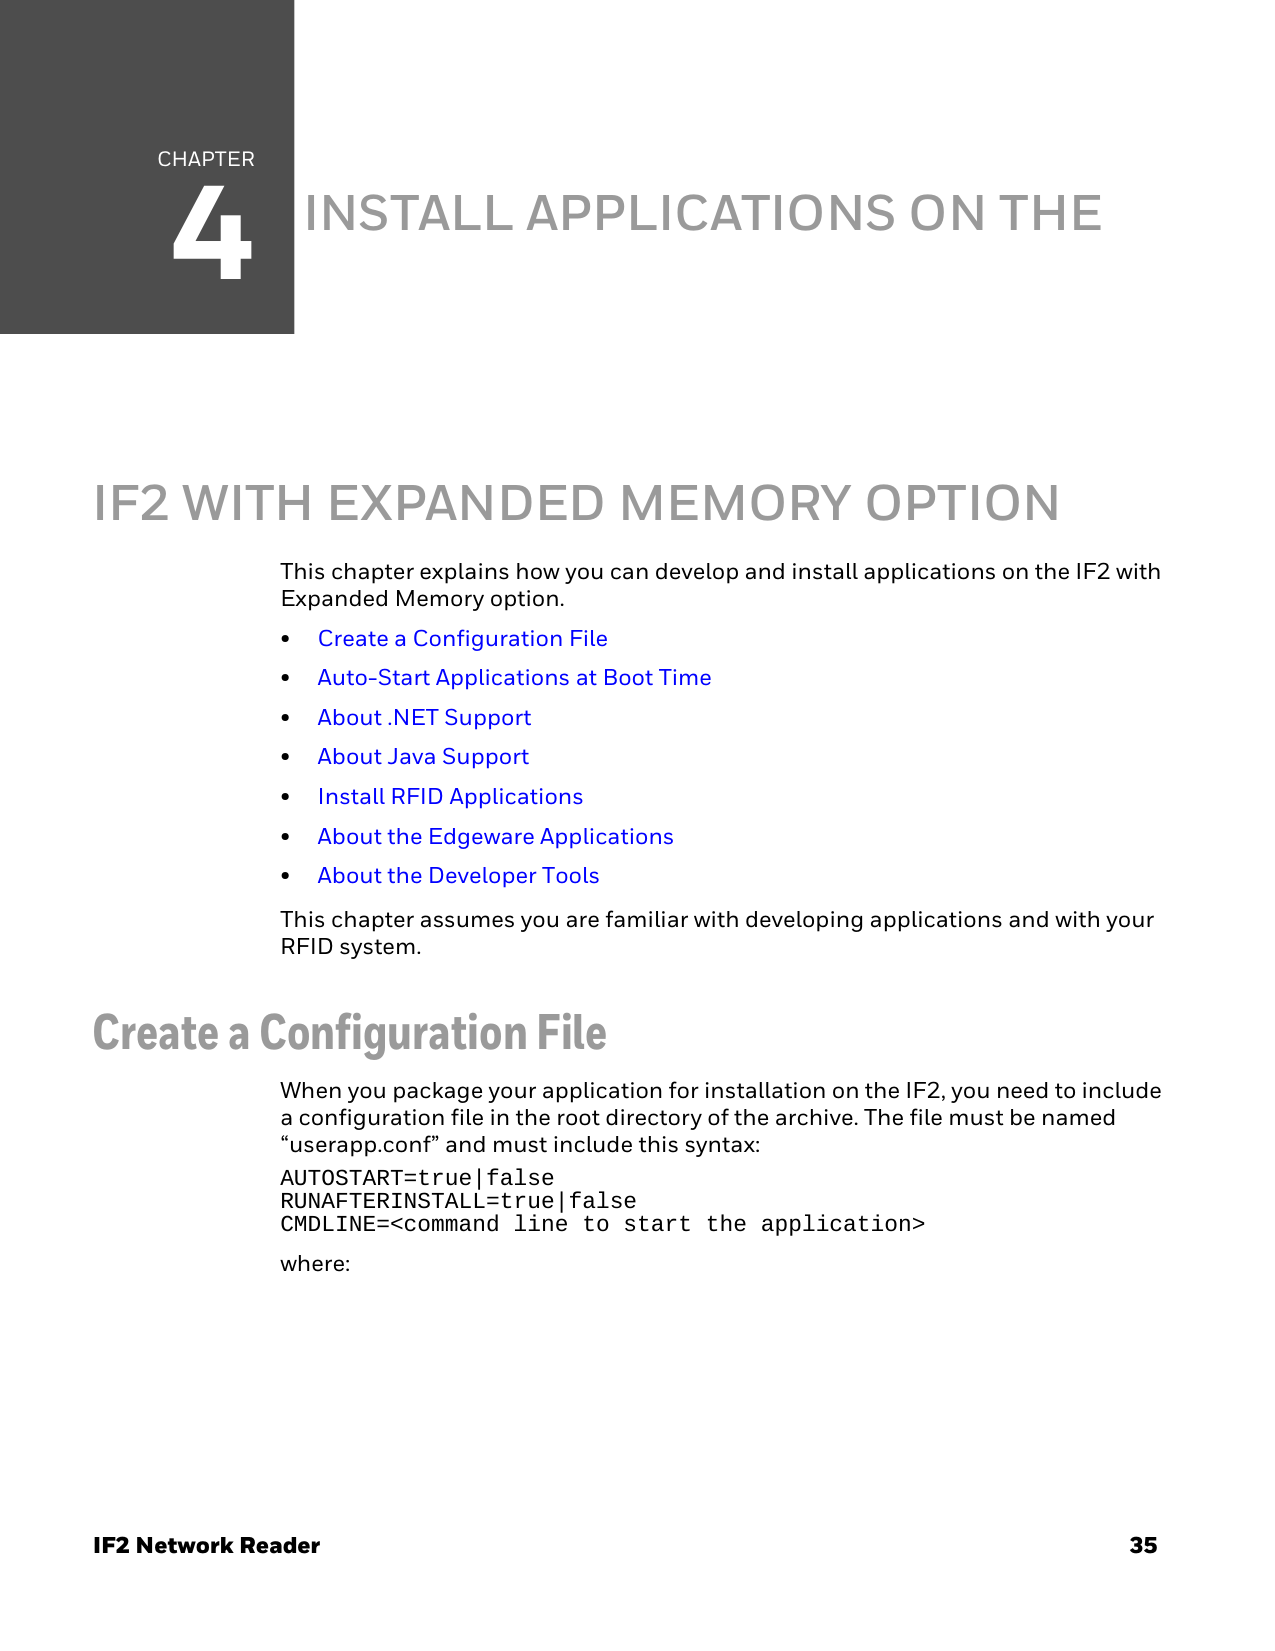 CHAPTER4IF2 Network Reader 35INSTALL APPLICATIONS ON THE IF2 WITH EXPANDED MEMORY OPTIONThis chapter explains how you can develop and install applications on the IF2 with Expanded Memory option.•Create a Configuration File•Auto-Start Applications at Boot Time•About .NET Support•About Java Support•Install RFID Applications•About the Edgeware Applications•About the Developer ToolsThis chapter assumes you are familiar with developing applications and with your RFID system.Create a Configuration File When you package your application for installation on the IF2, you need to include a configuration file in the root directory of the archive. The file must be named “userapp.conf” and must include this syntax:AUTOSTART=true|falseRUNAFTERINSTALL=true|falseCMDLINE=&lt;command line to start the application&gt;where: